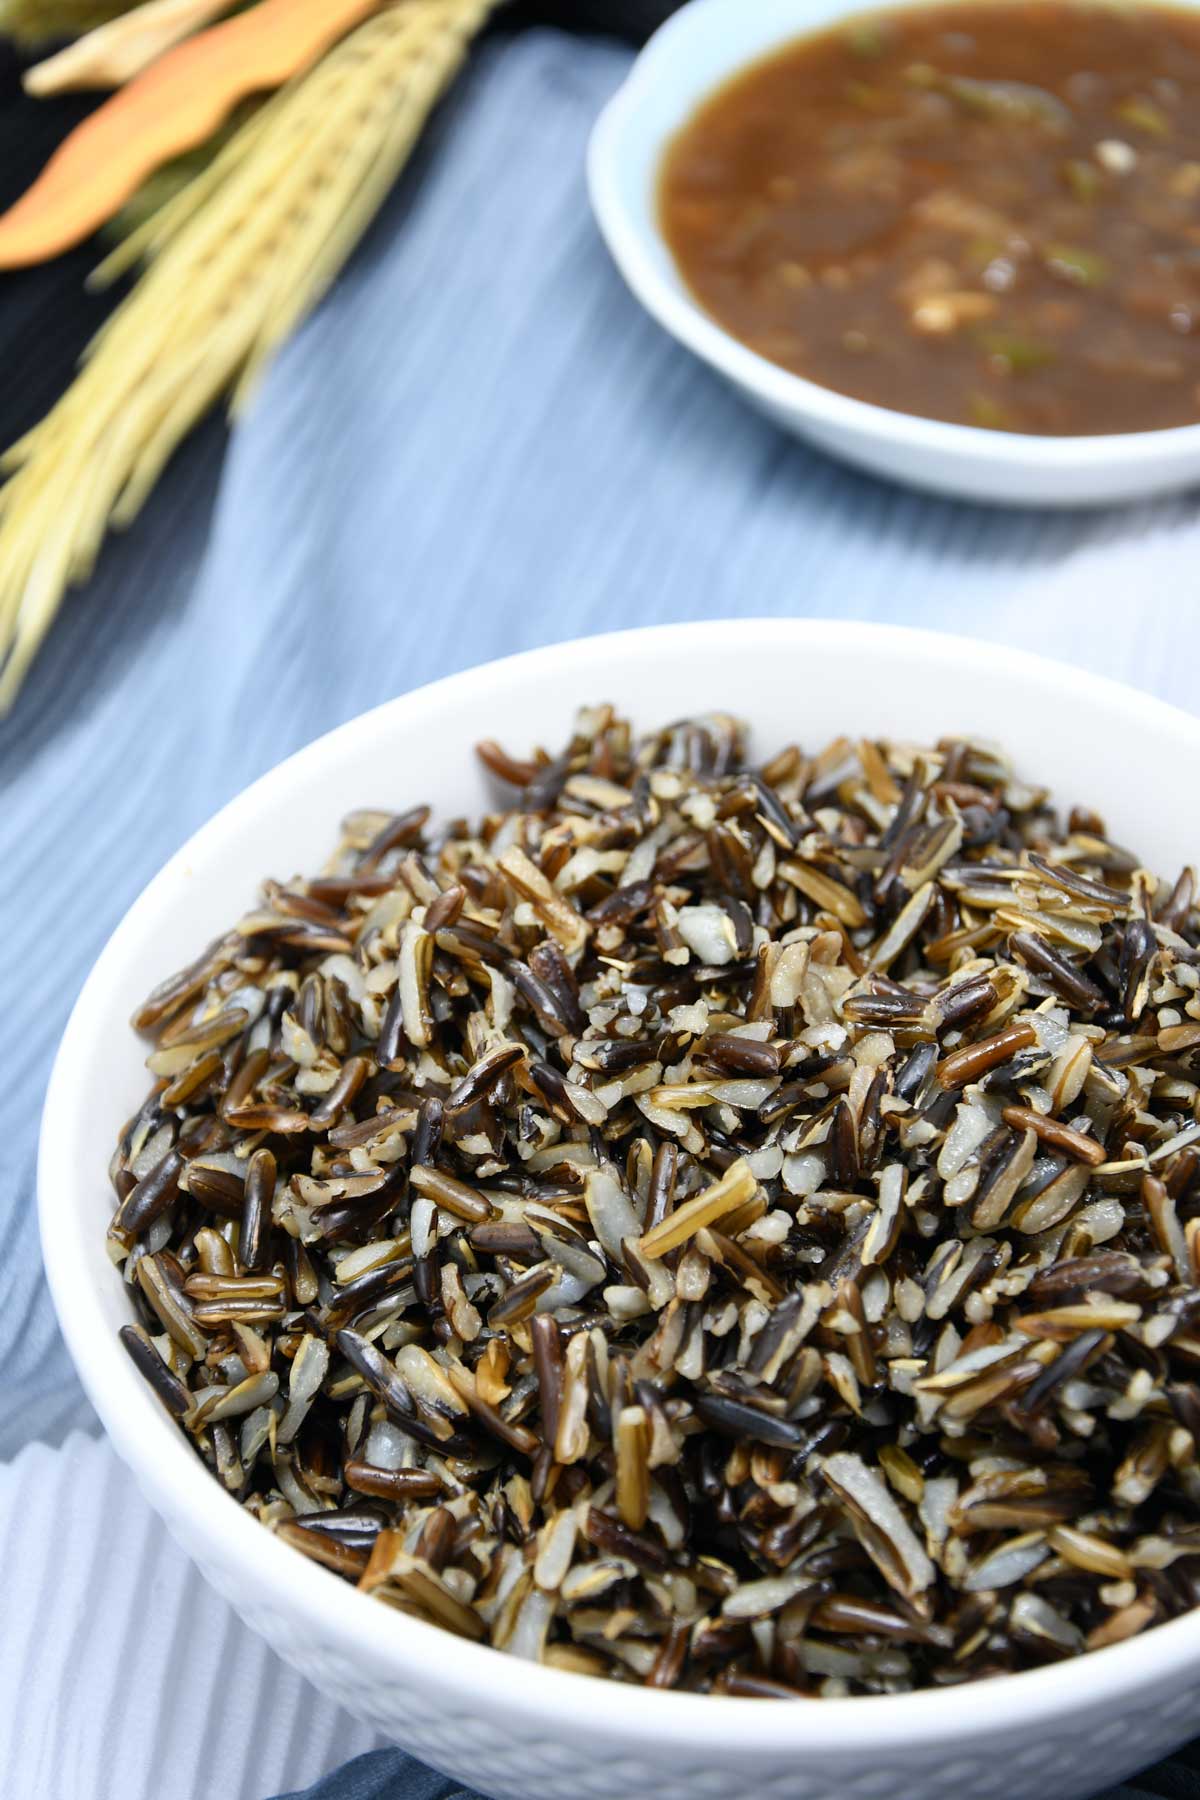 Instant pot wild rice in a bowl.